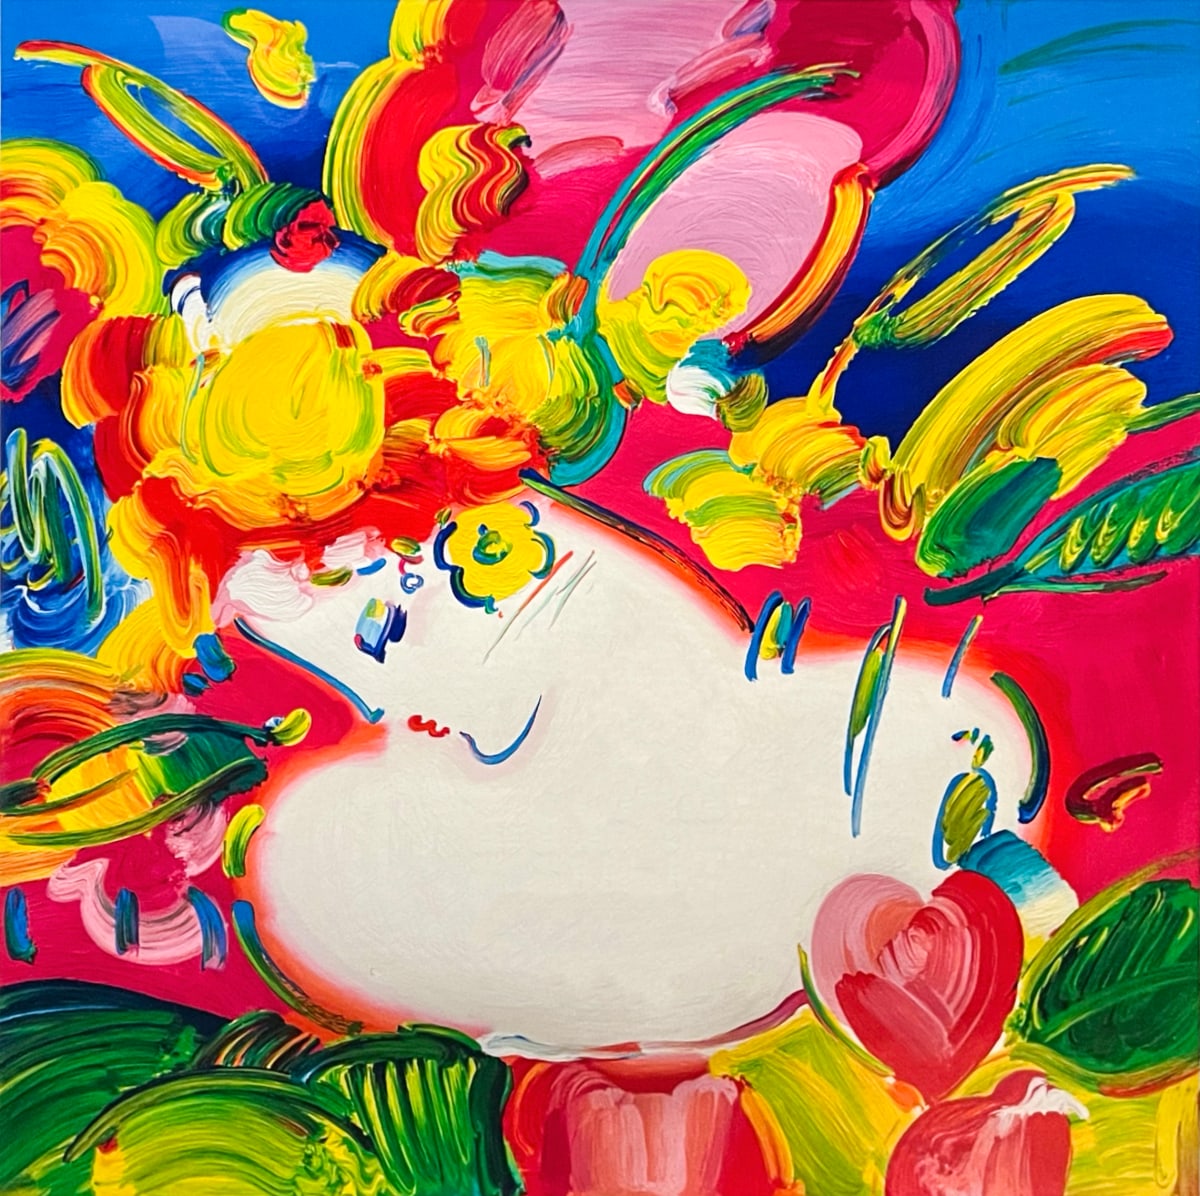 Flower Blossom Lady  Image: Peter Max unframed